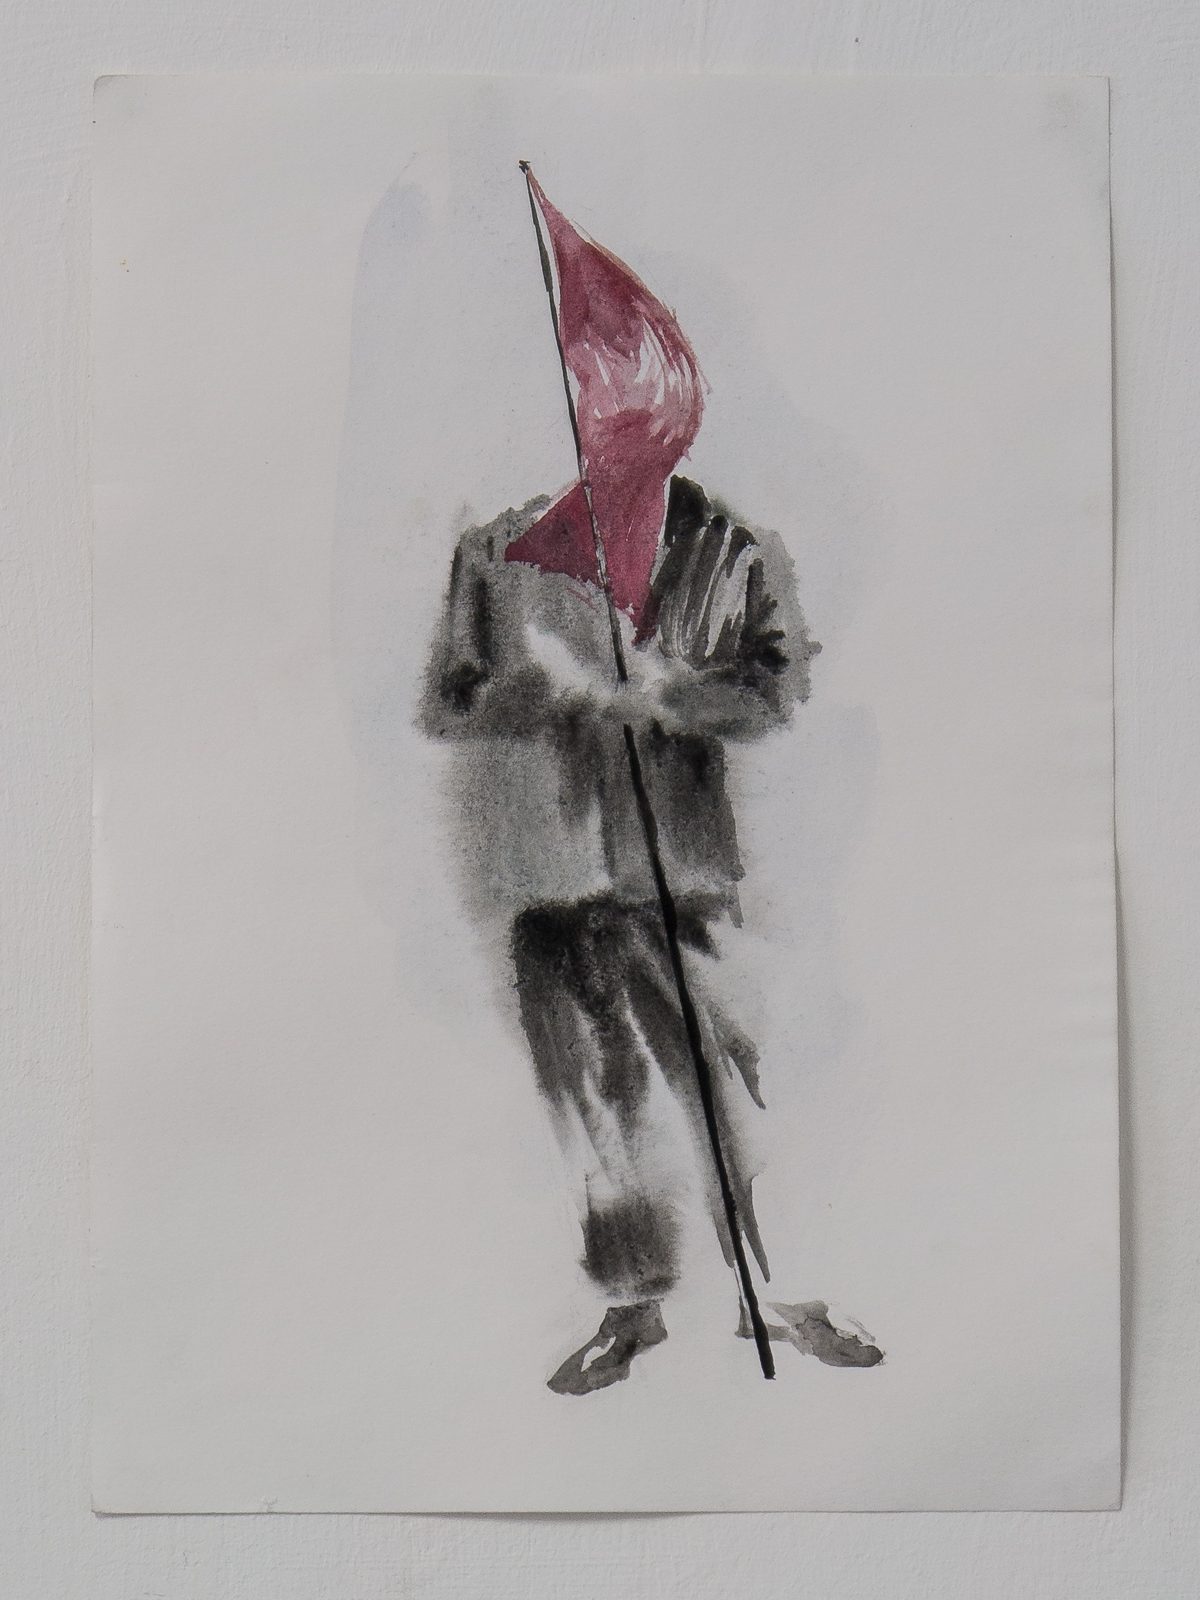 »Flagged«, 2012, ink on paper, 24.7  x 34.8 cm